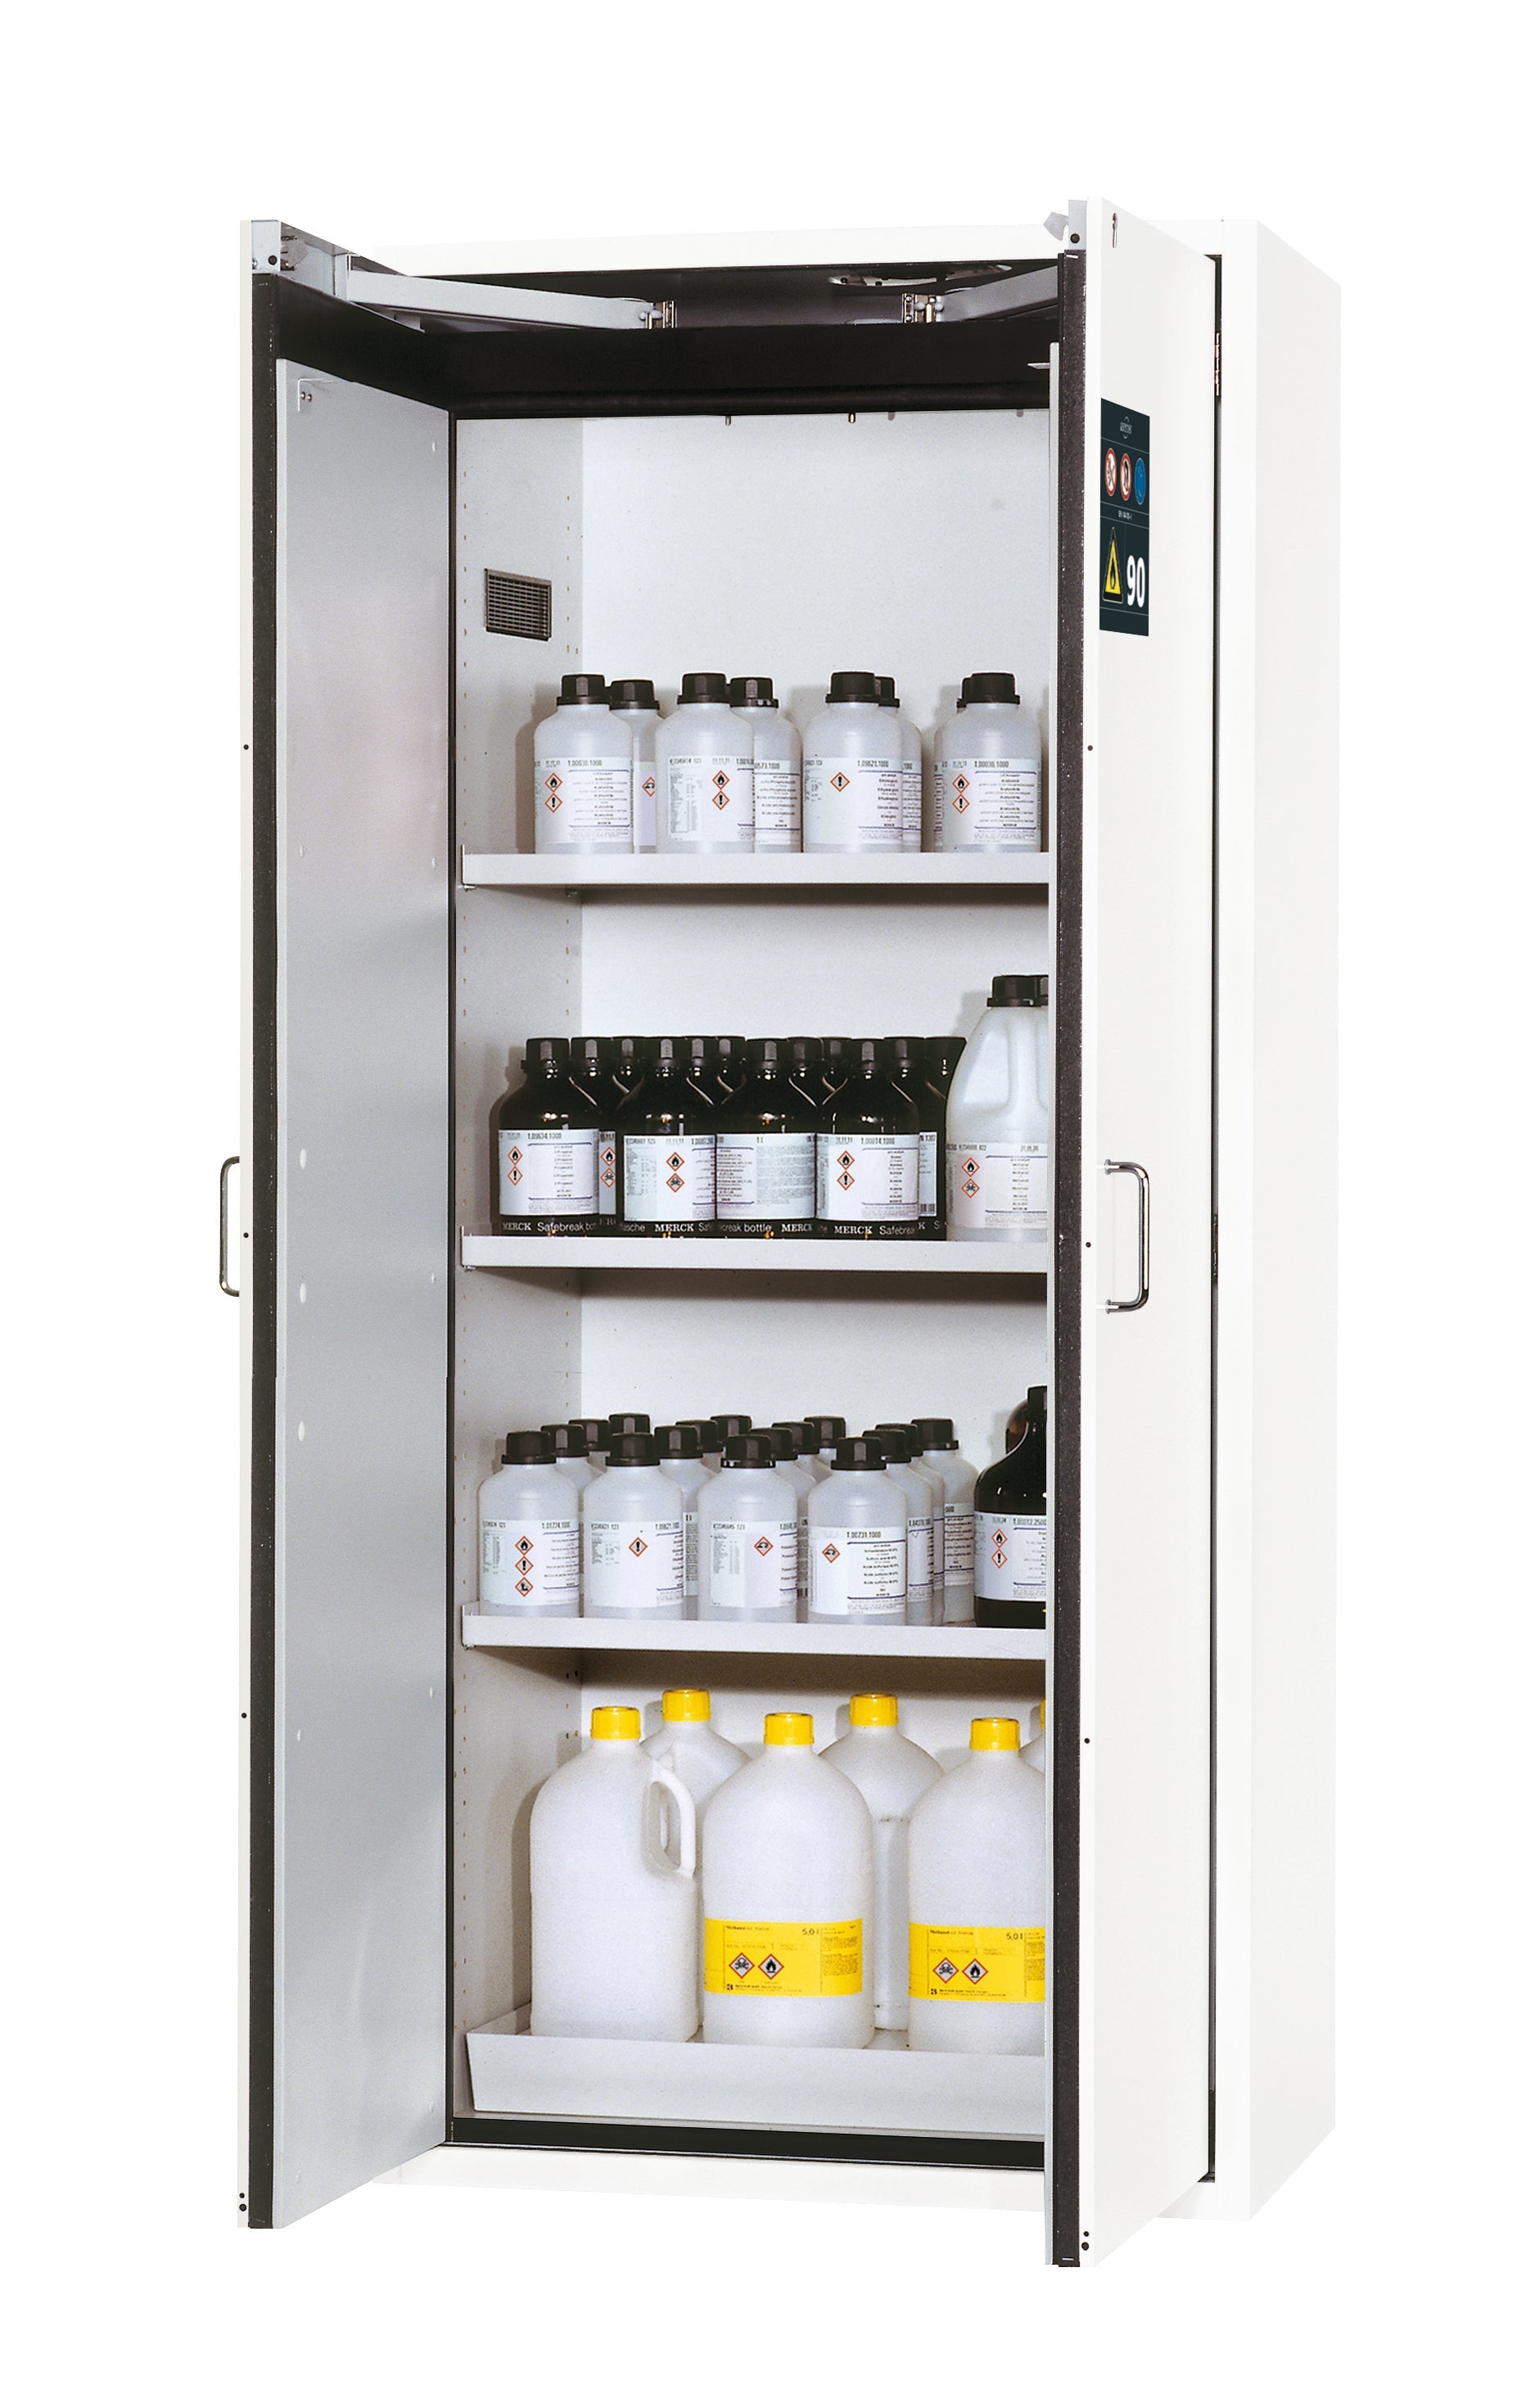 Type 90 safety cabinet S-CLASSIC-90 model S90.196.090.WDAS in laboratory white (similar to RAL 9016) with 3x standard shelves (sheet steel)